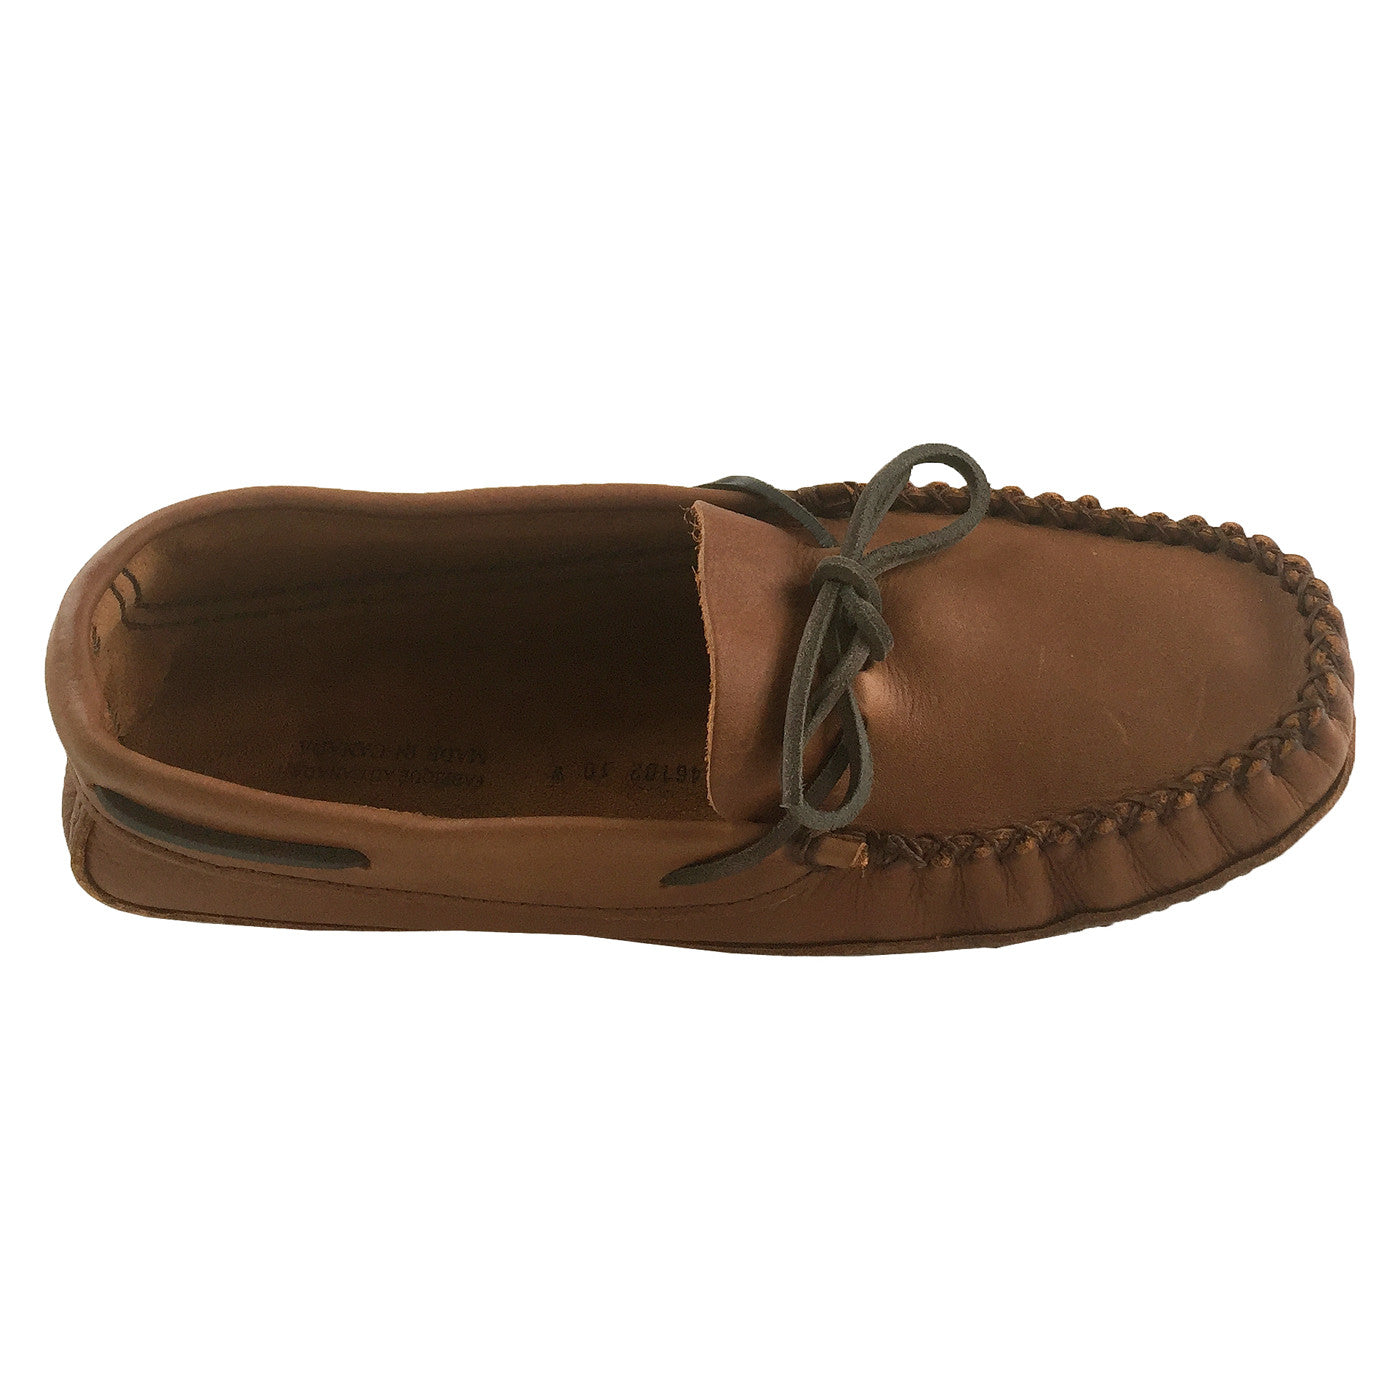 Mens wide width slippers, Shoes + FREE SHIPPING | Zappos.com